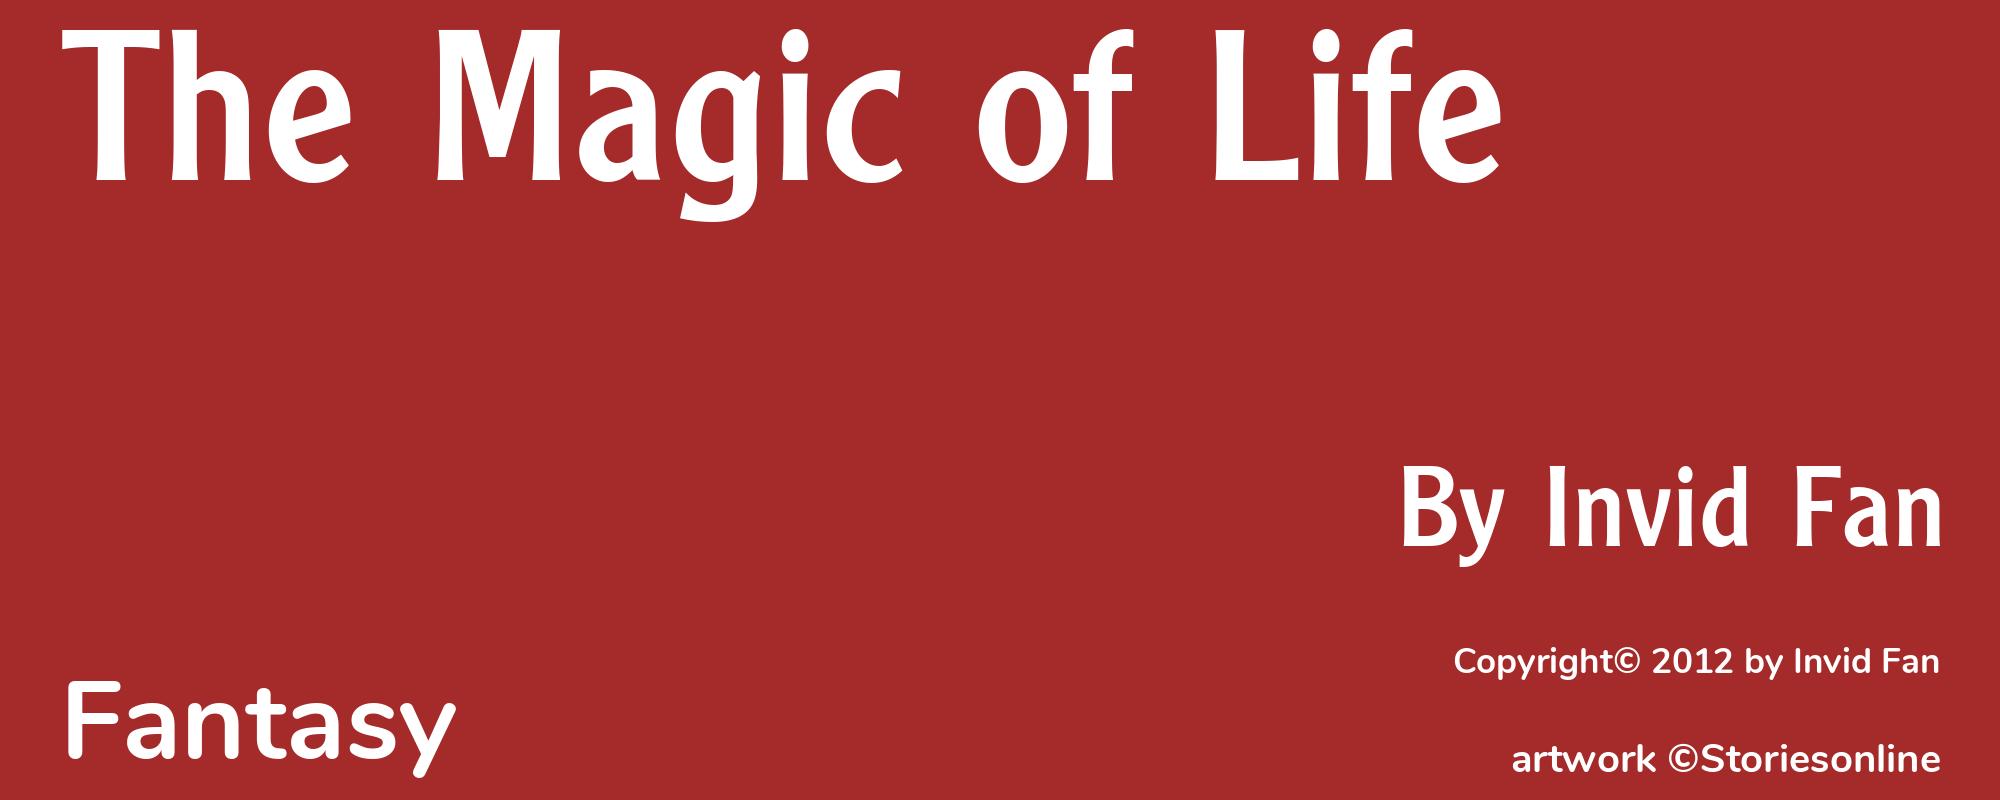 The Magic of Life - Cover